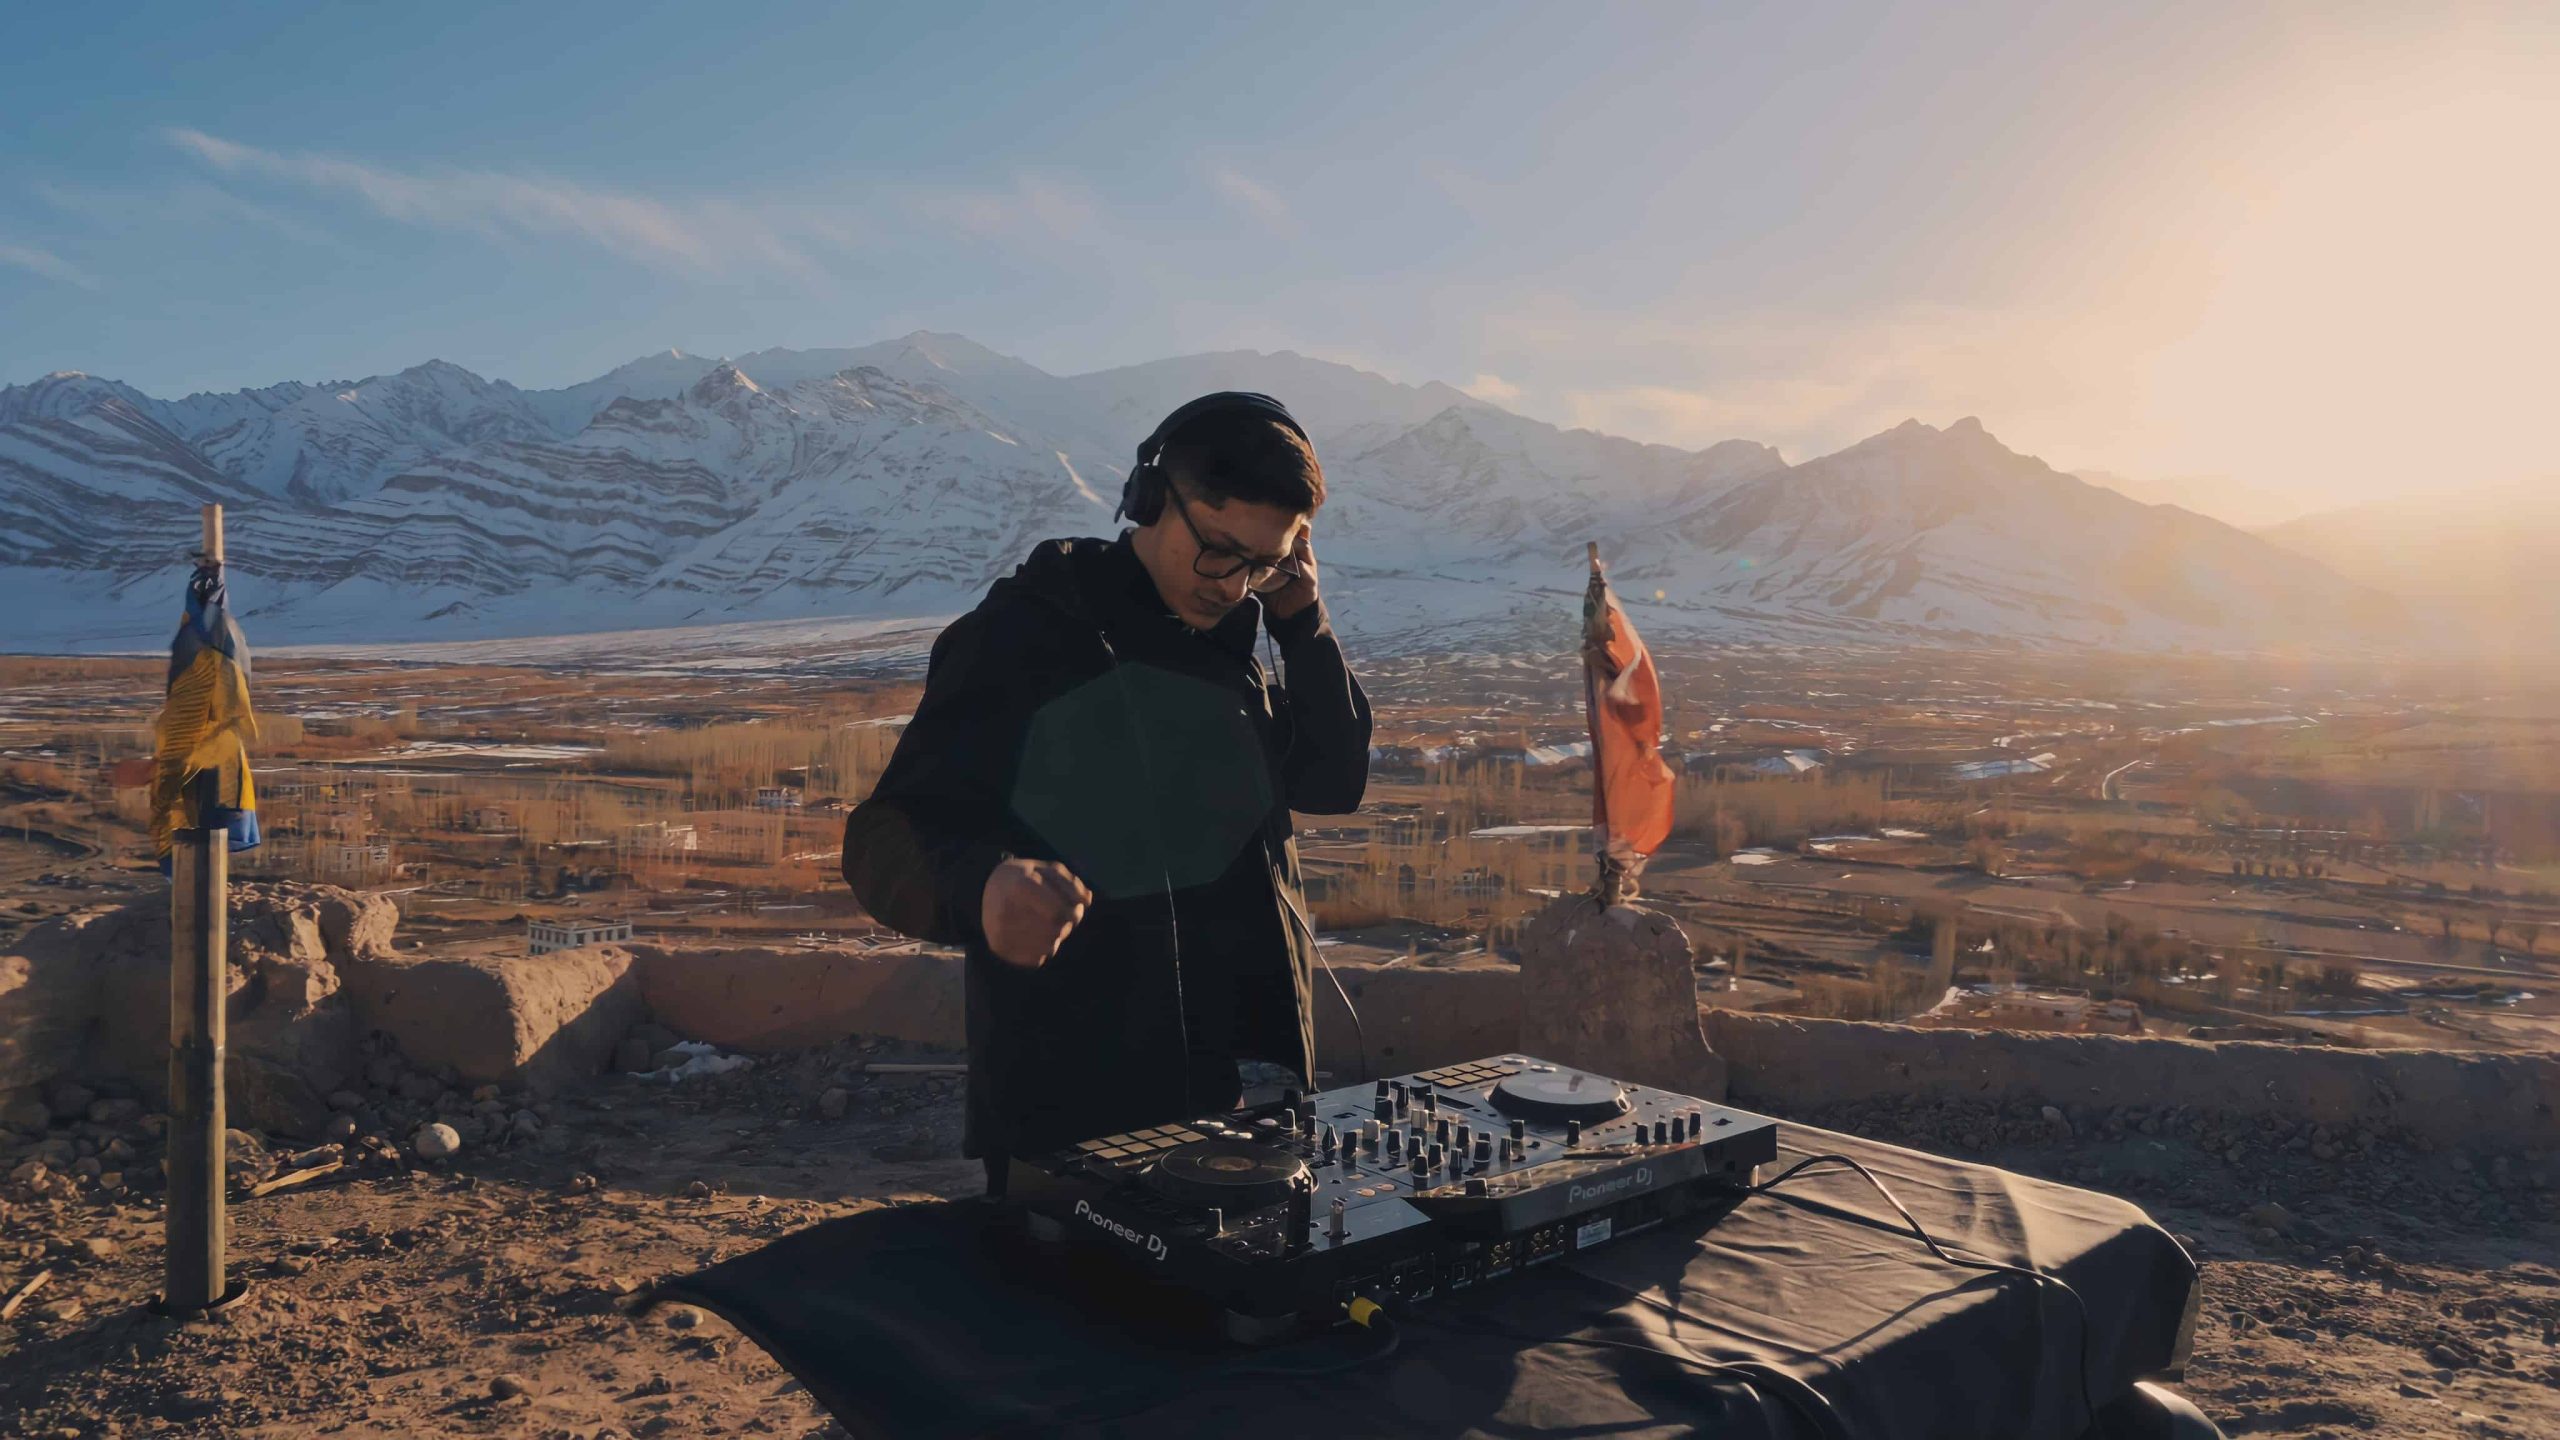 Kaamin performs liveset from Stakna Monastery in Ladakh, India for first edition of Hideout series